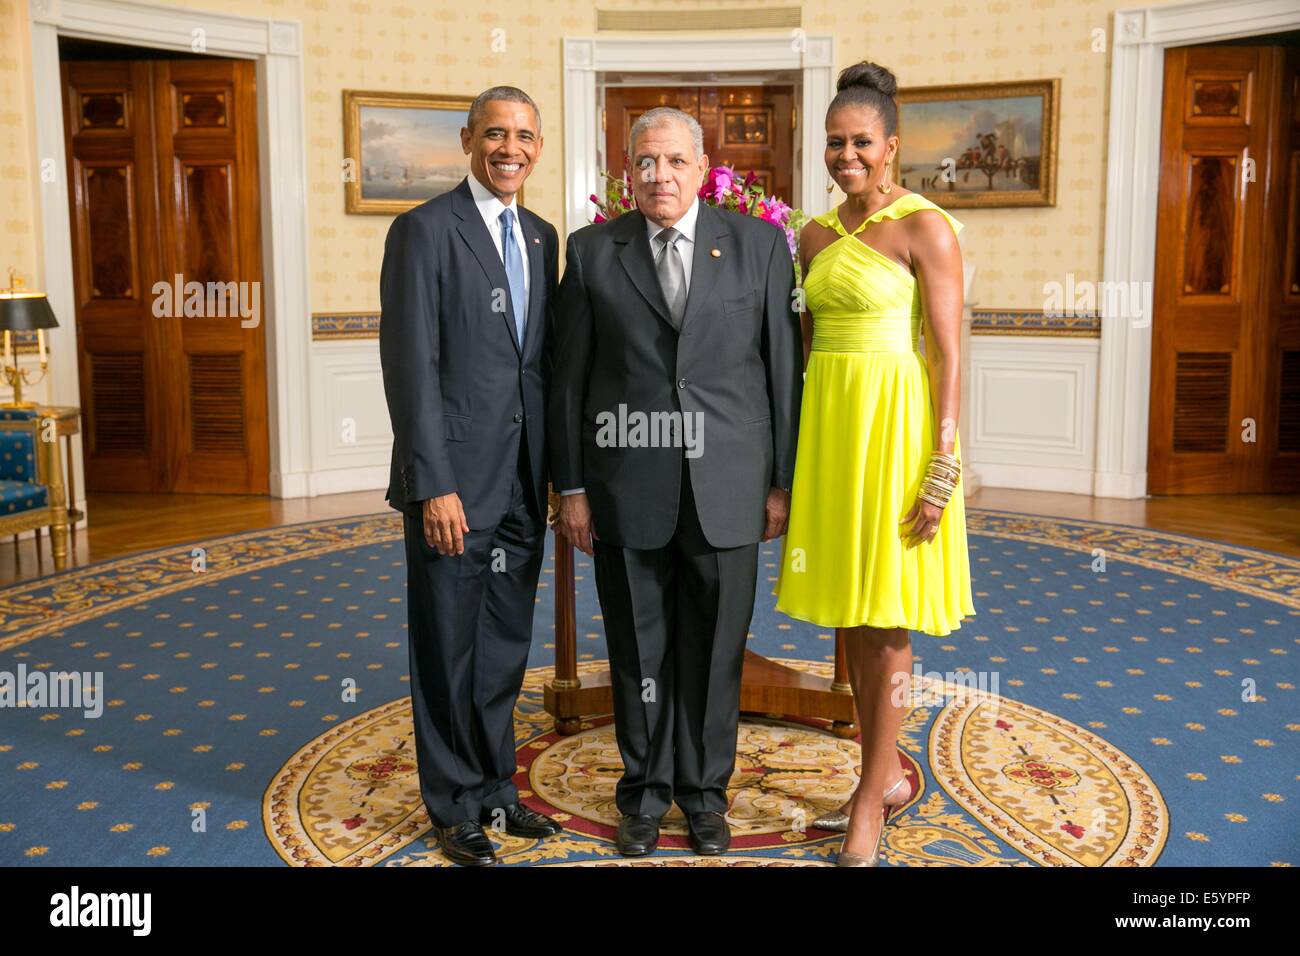 US President Barack Obama and First Lady Michelle Obama pose with Ibrahim Roshdy Mahlab, Prime Minister of Egypt, in the Blue Room of the White House before the U.S.-Africa Leaders Summit dinner August 5, 2014 in Washington, DC. Stock Photo